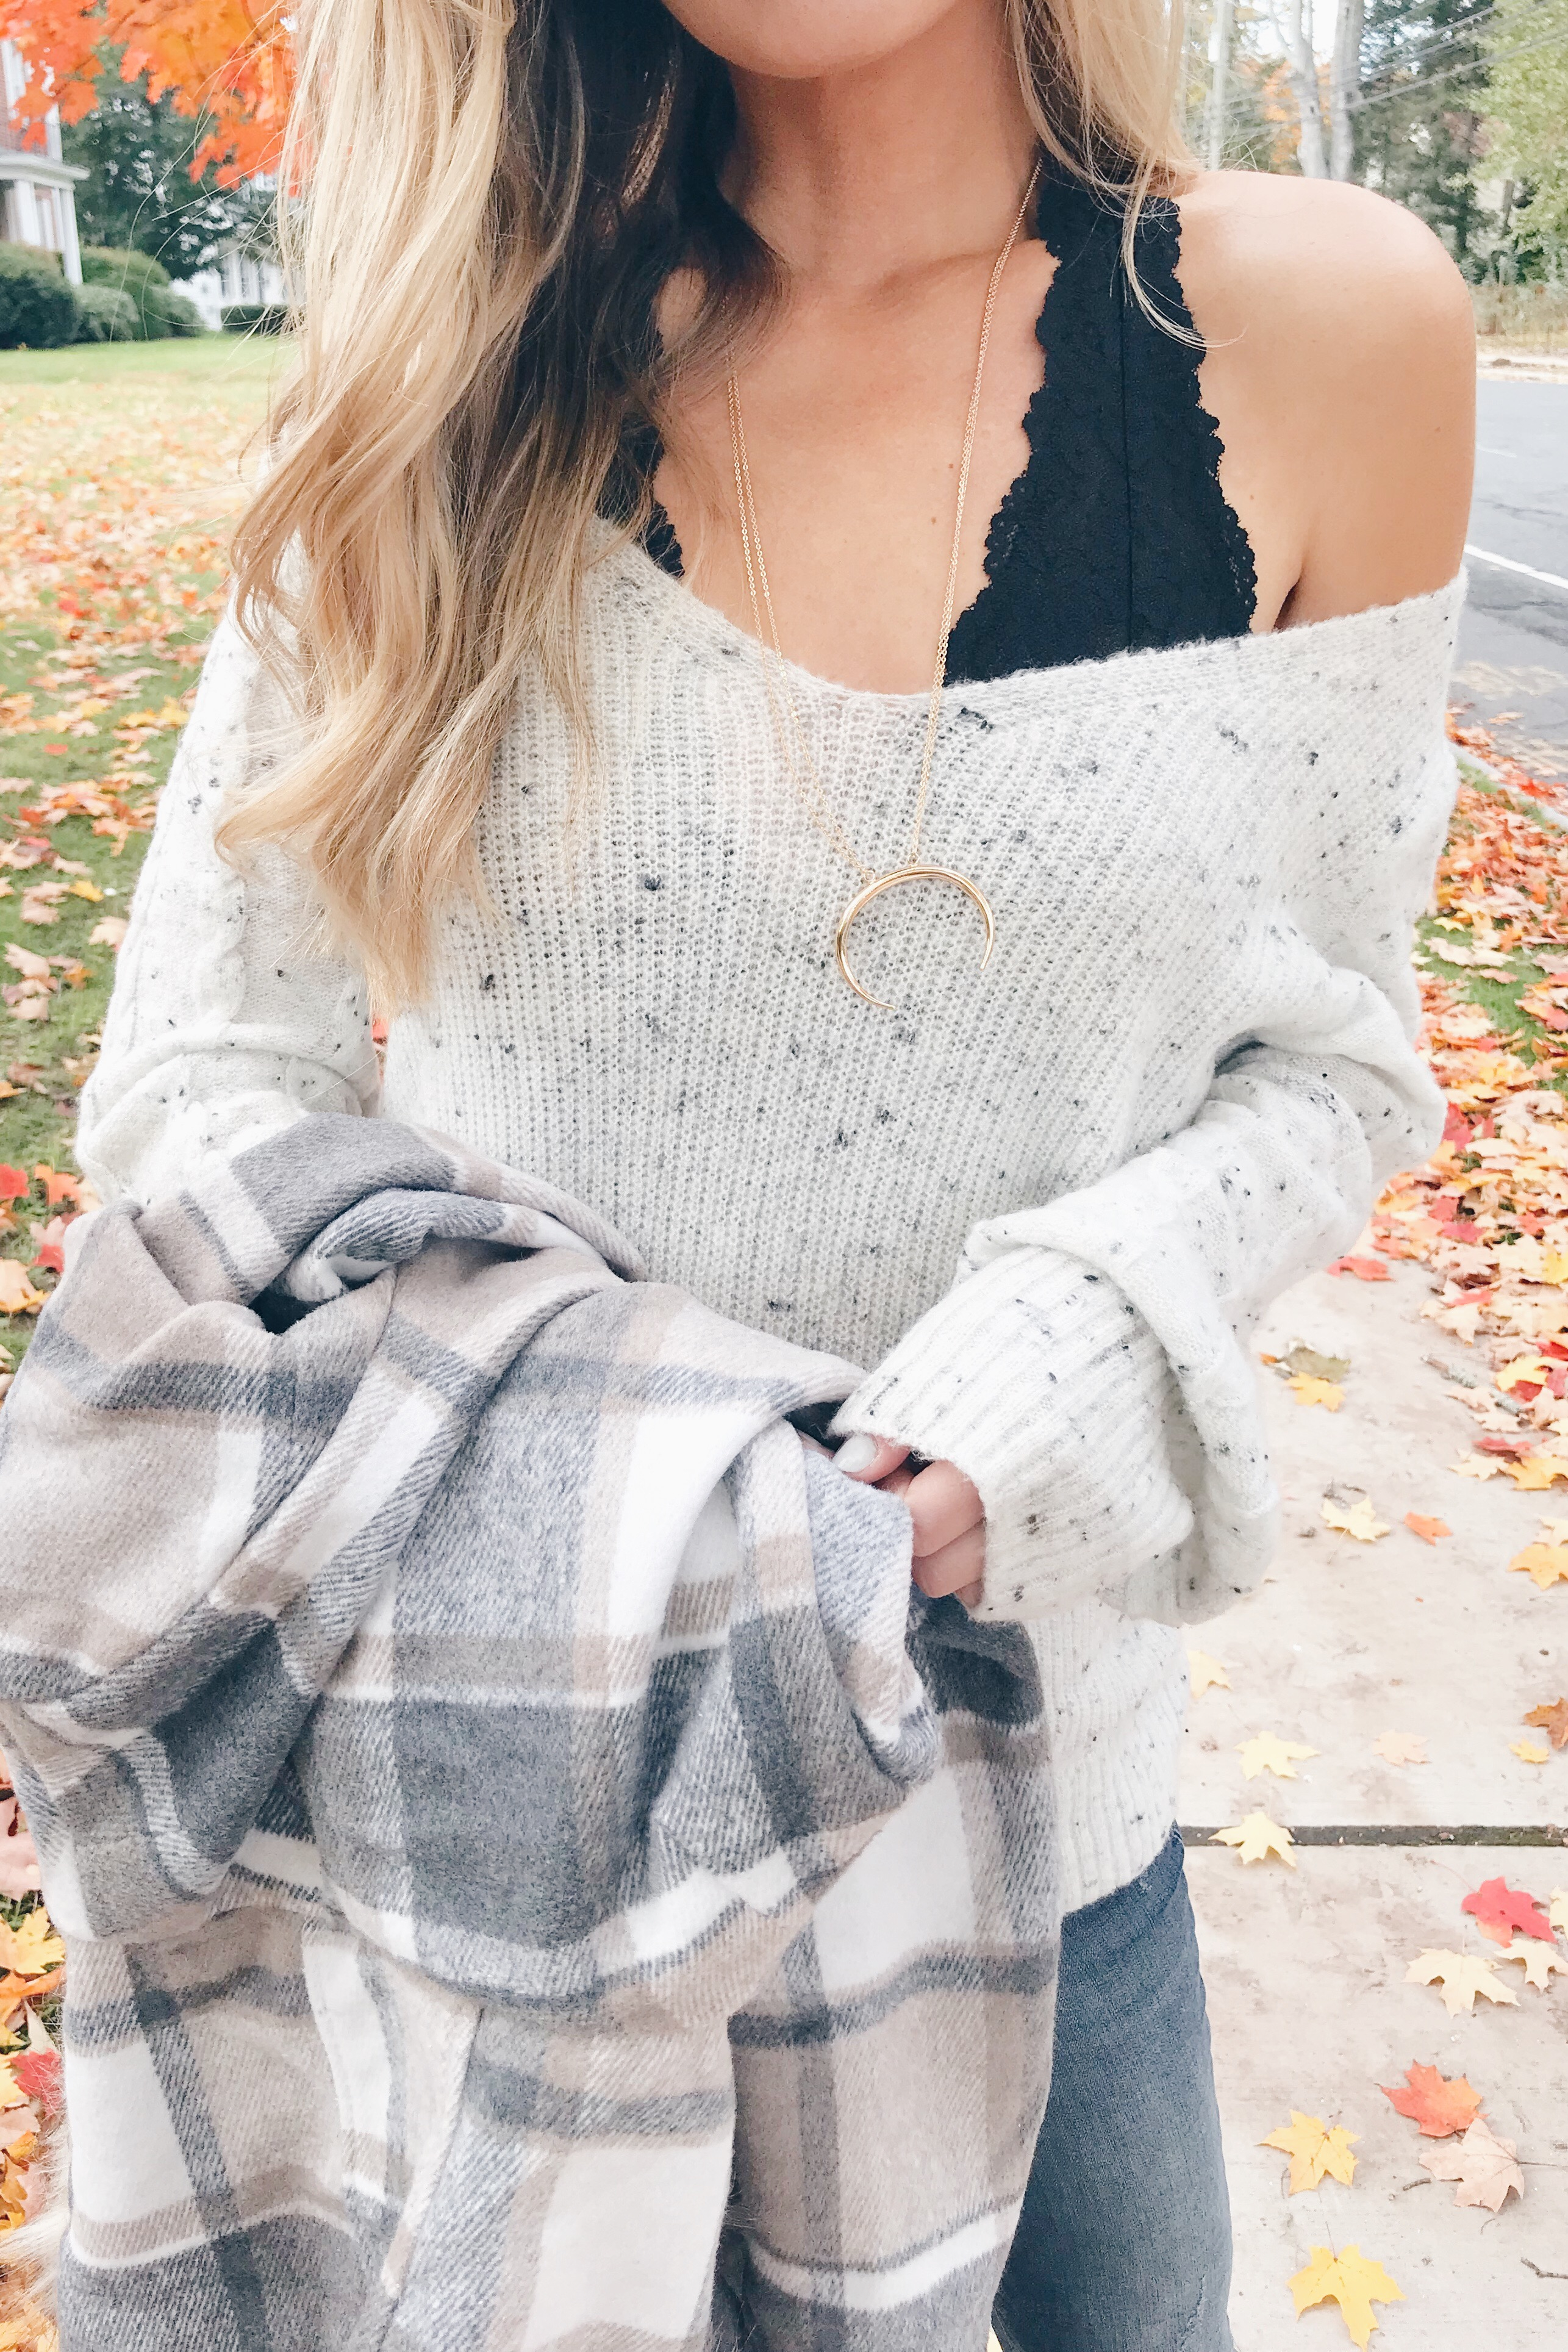  bralette under sweater and statement fall outerwear on pinteresting plans fashion blog